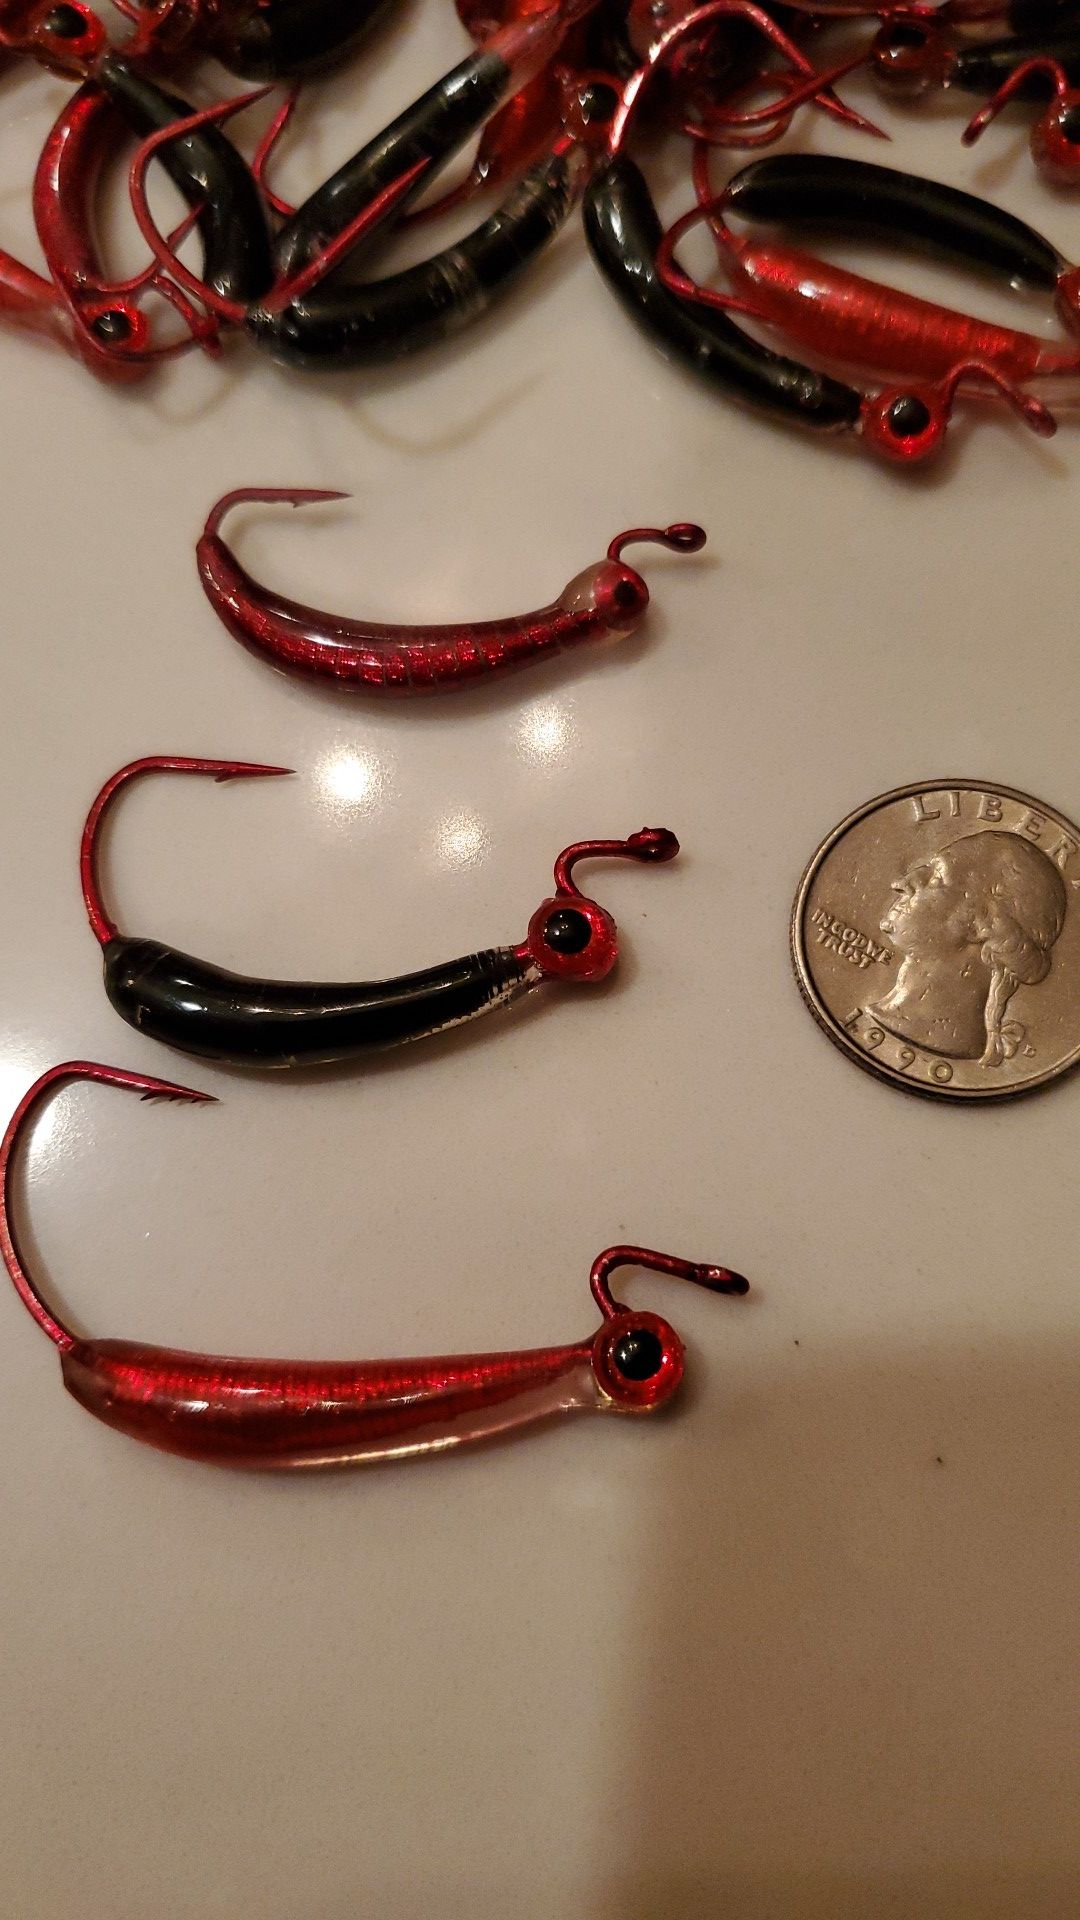 Fishing lures- weighted and coated jerk bait hooks